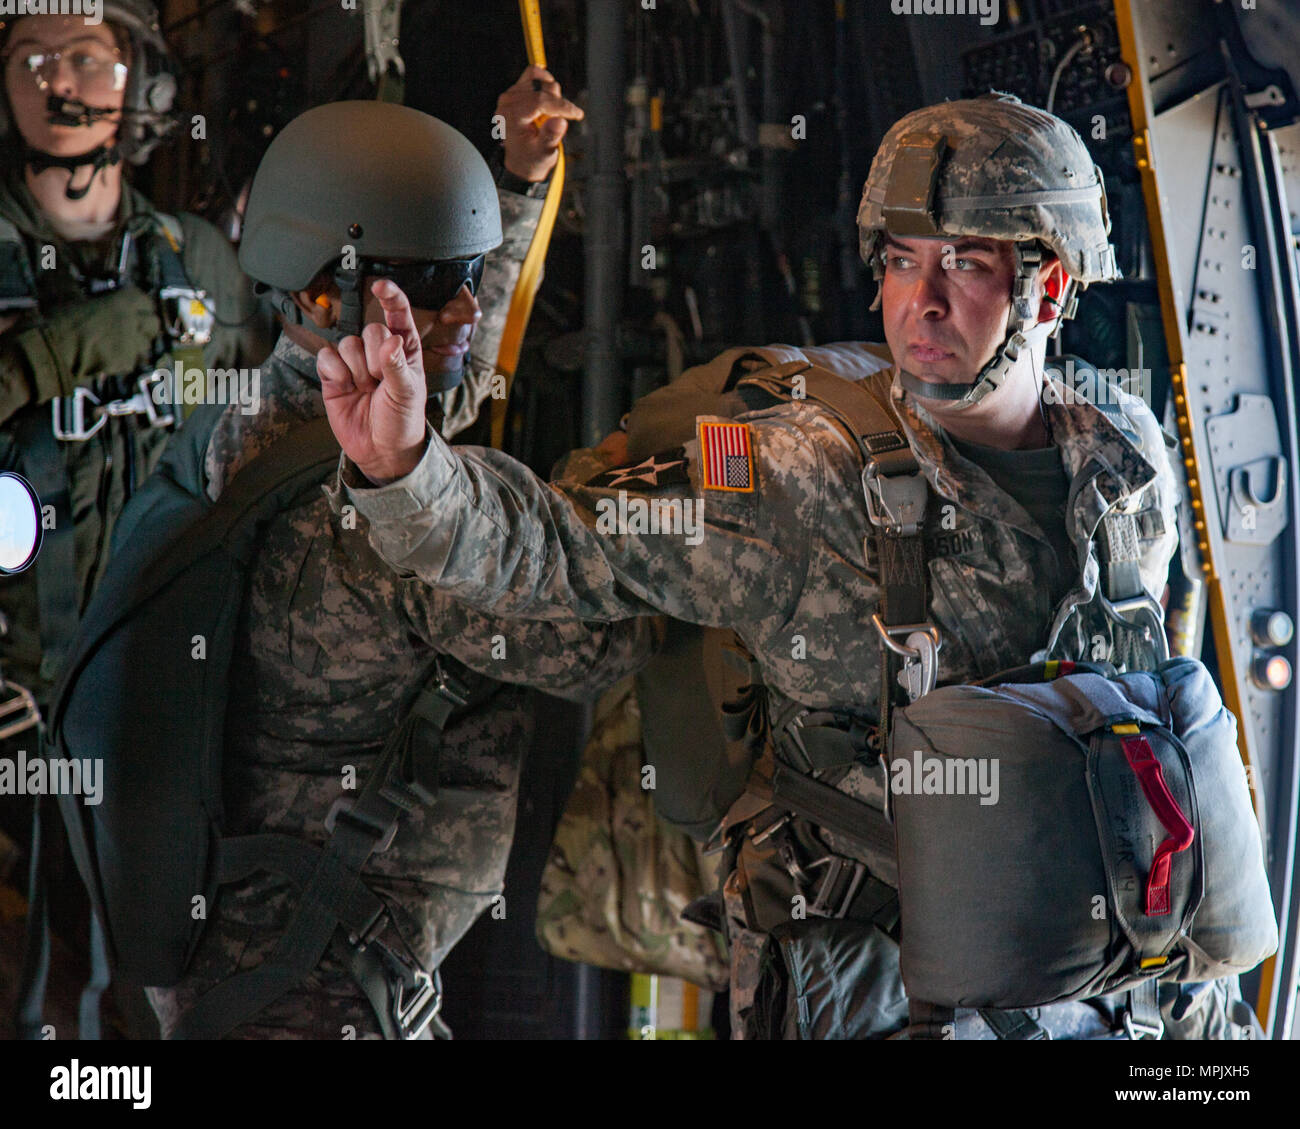 U.S. Army Sgt. 1st Class Andrew Severson of the 15th Psychological Operations Battalion uses hand signals to communicate with another JumpMaster during a static line jump over Augusta, Ga., March 3, 2017. The paratroopers jump to fulfill Airborne obligations while also building confidence and experience, ensuring they remain mission capable. (U.S. Army photo by Spc. Jesse Coggins/Released) Stock Photo